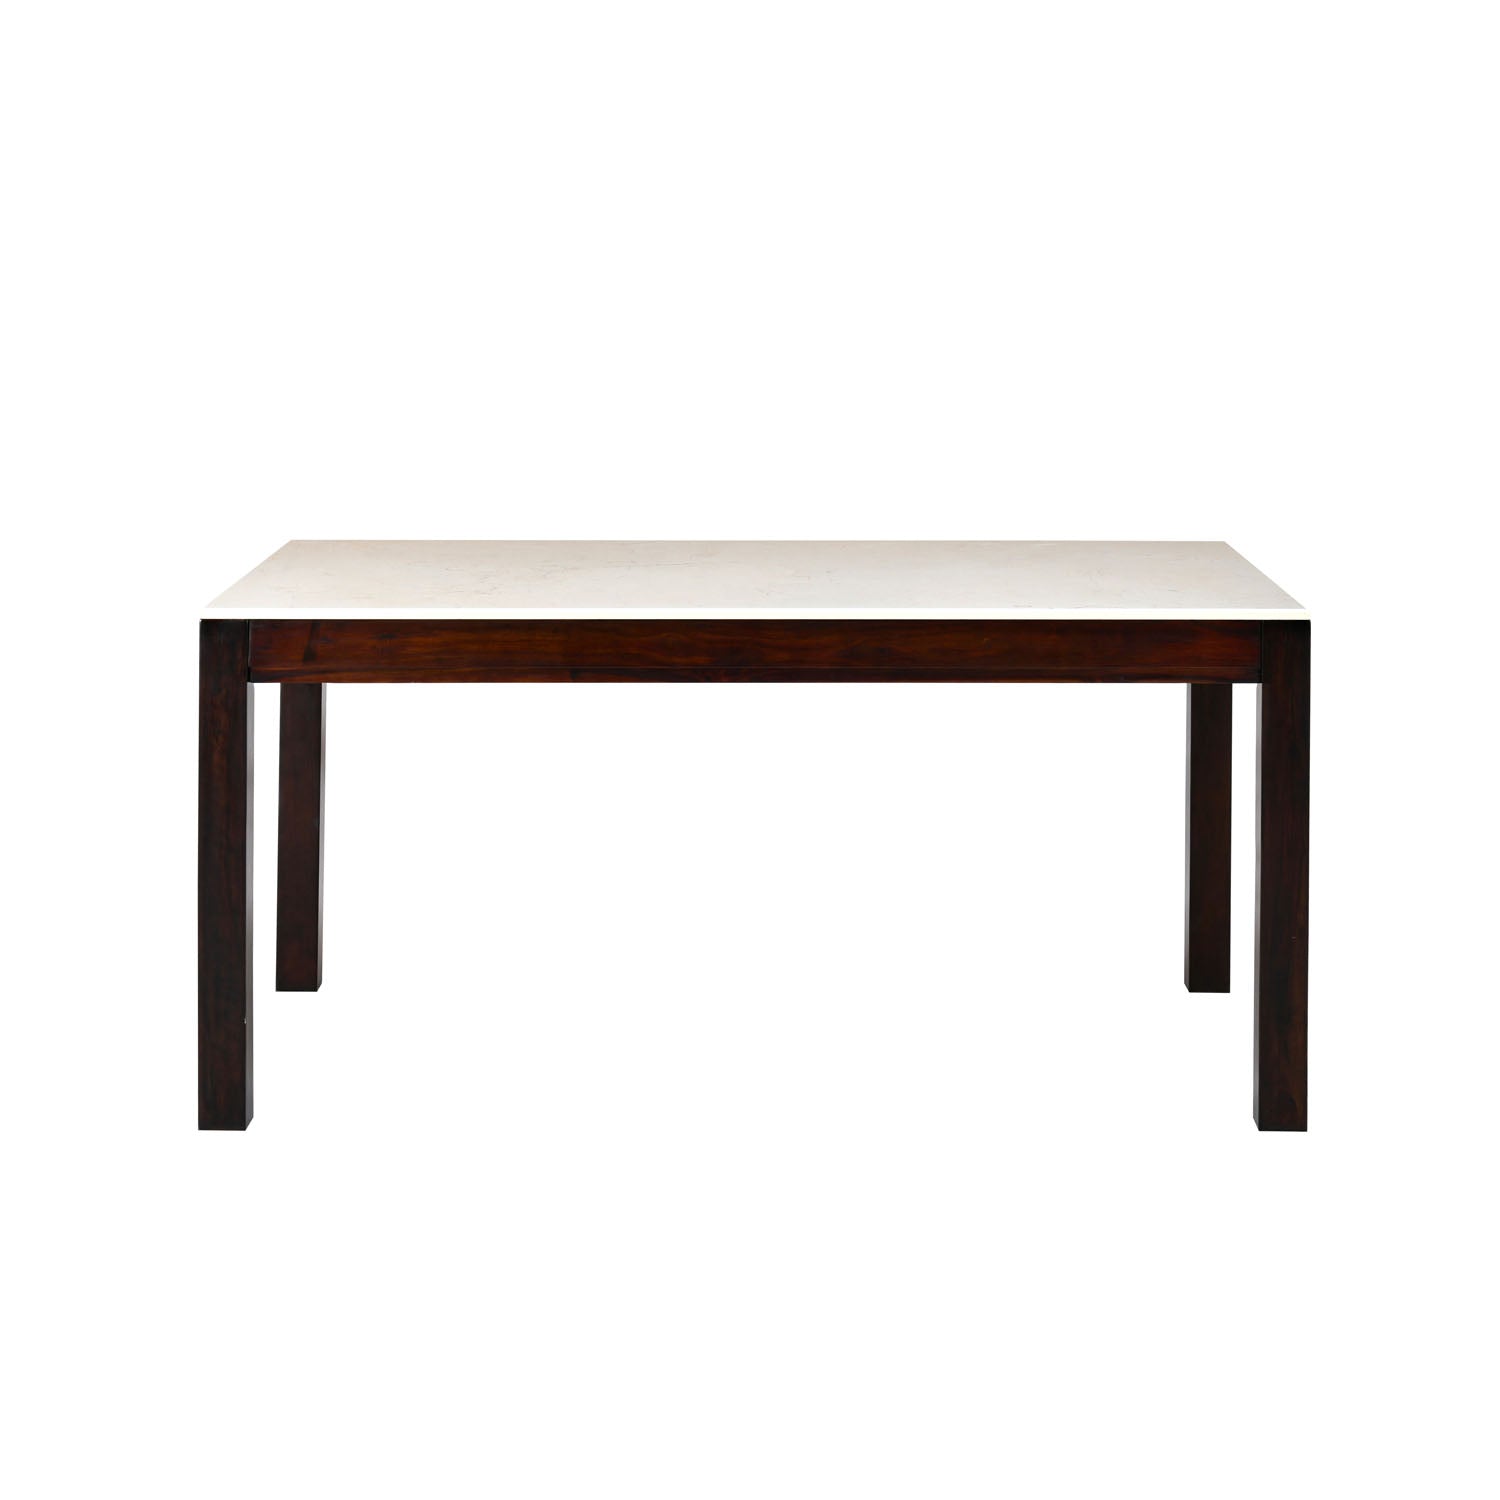 Pedro Ceramic Stone Top Solid Wood Dining Table in Beige Finish